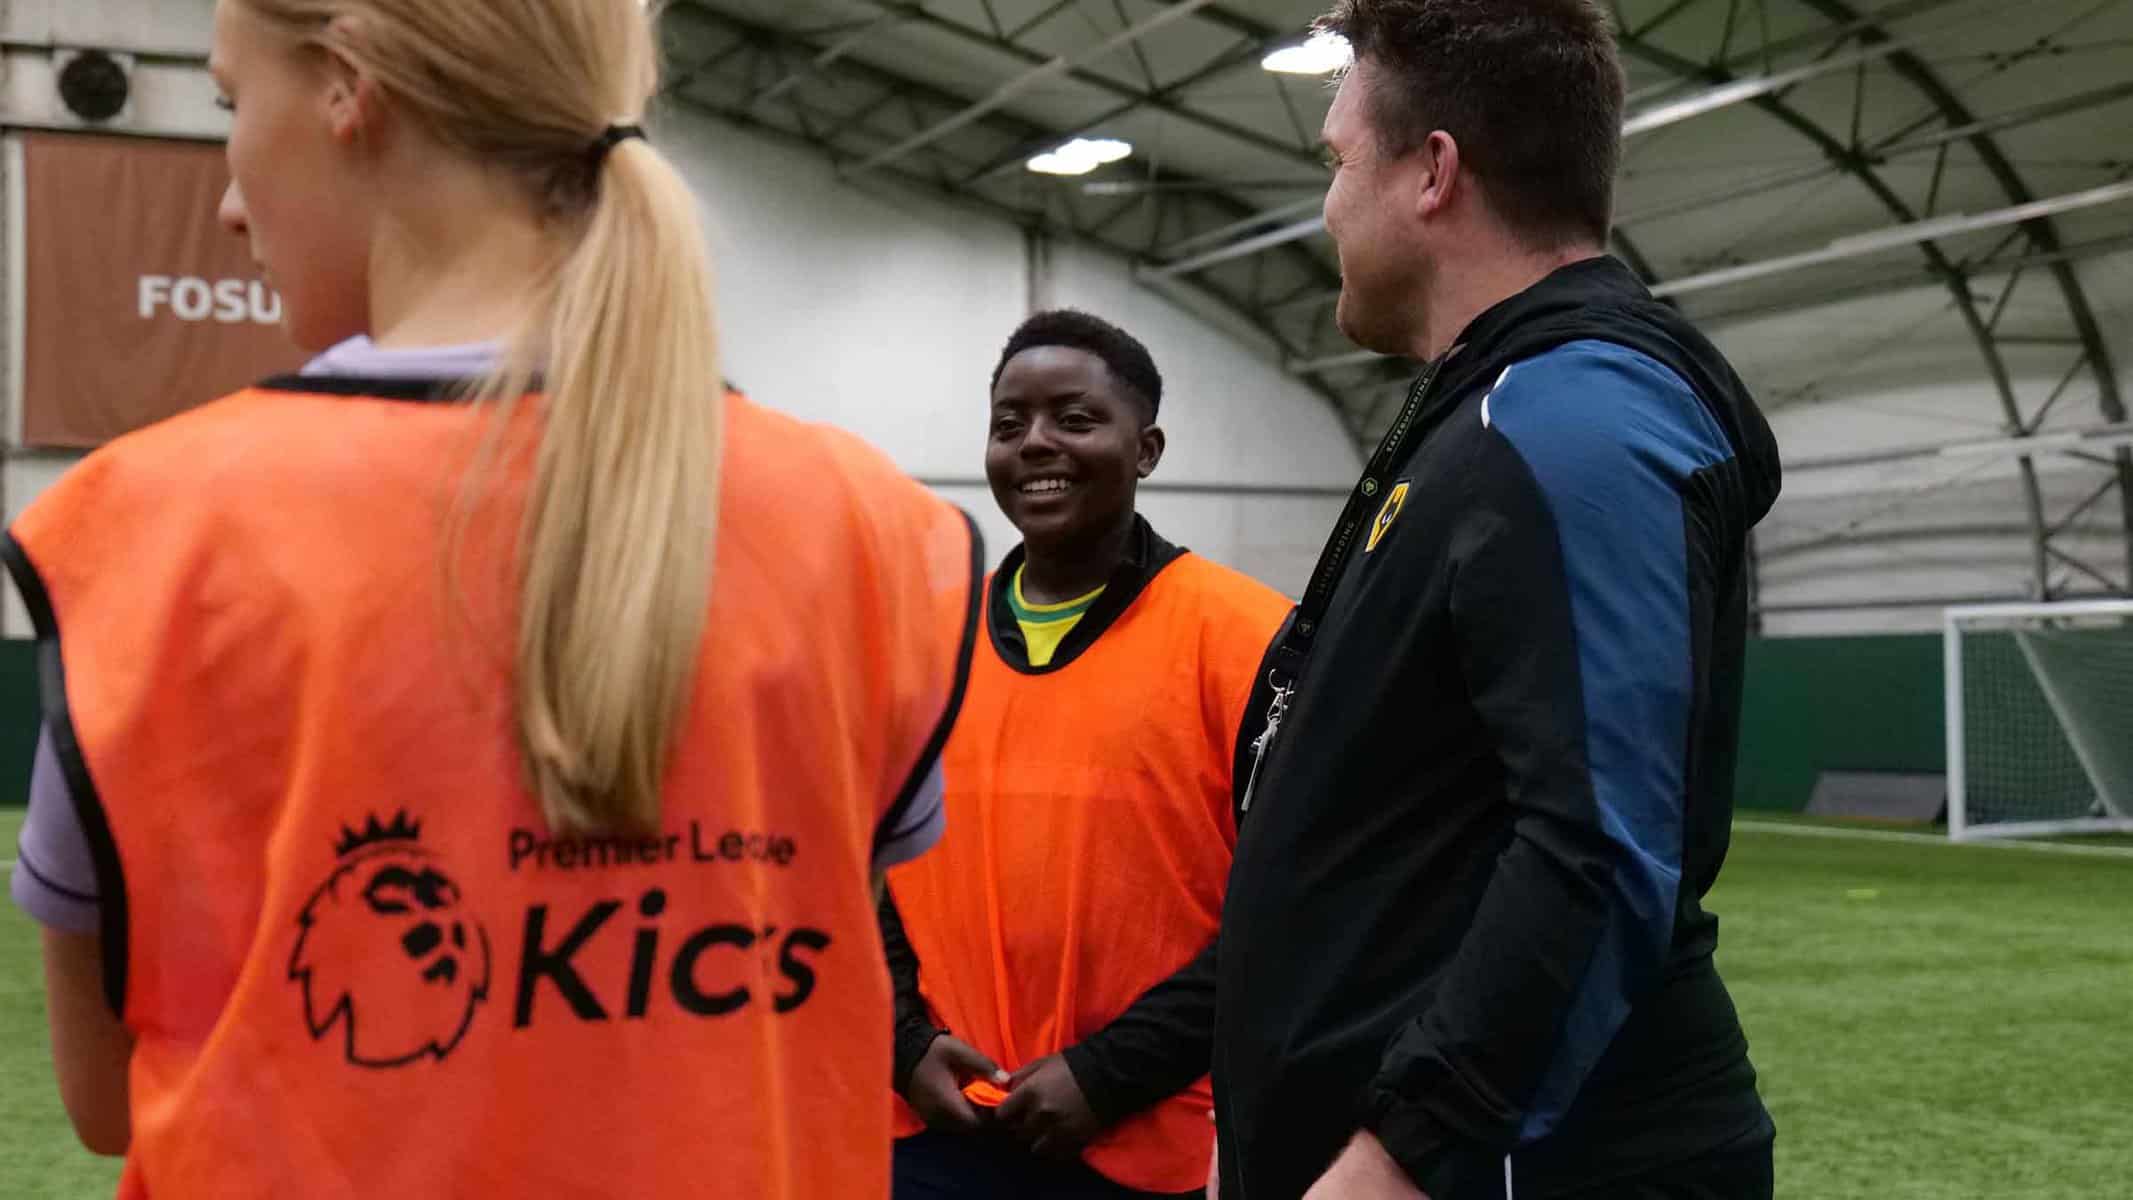 Wolves Foundation get their Kicks during Black History Month Image